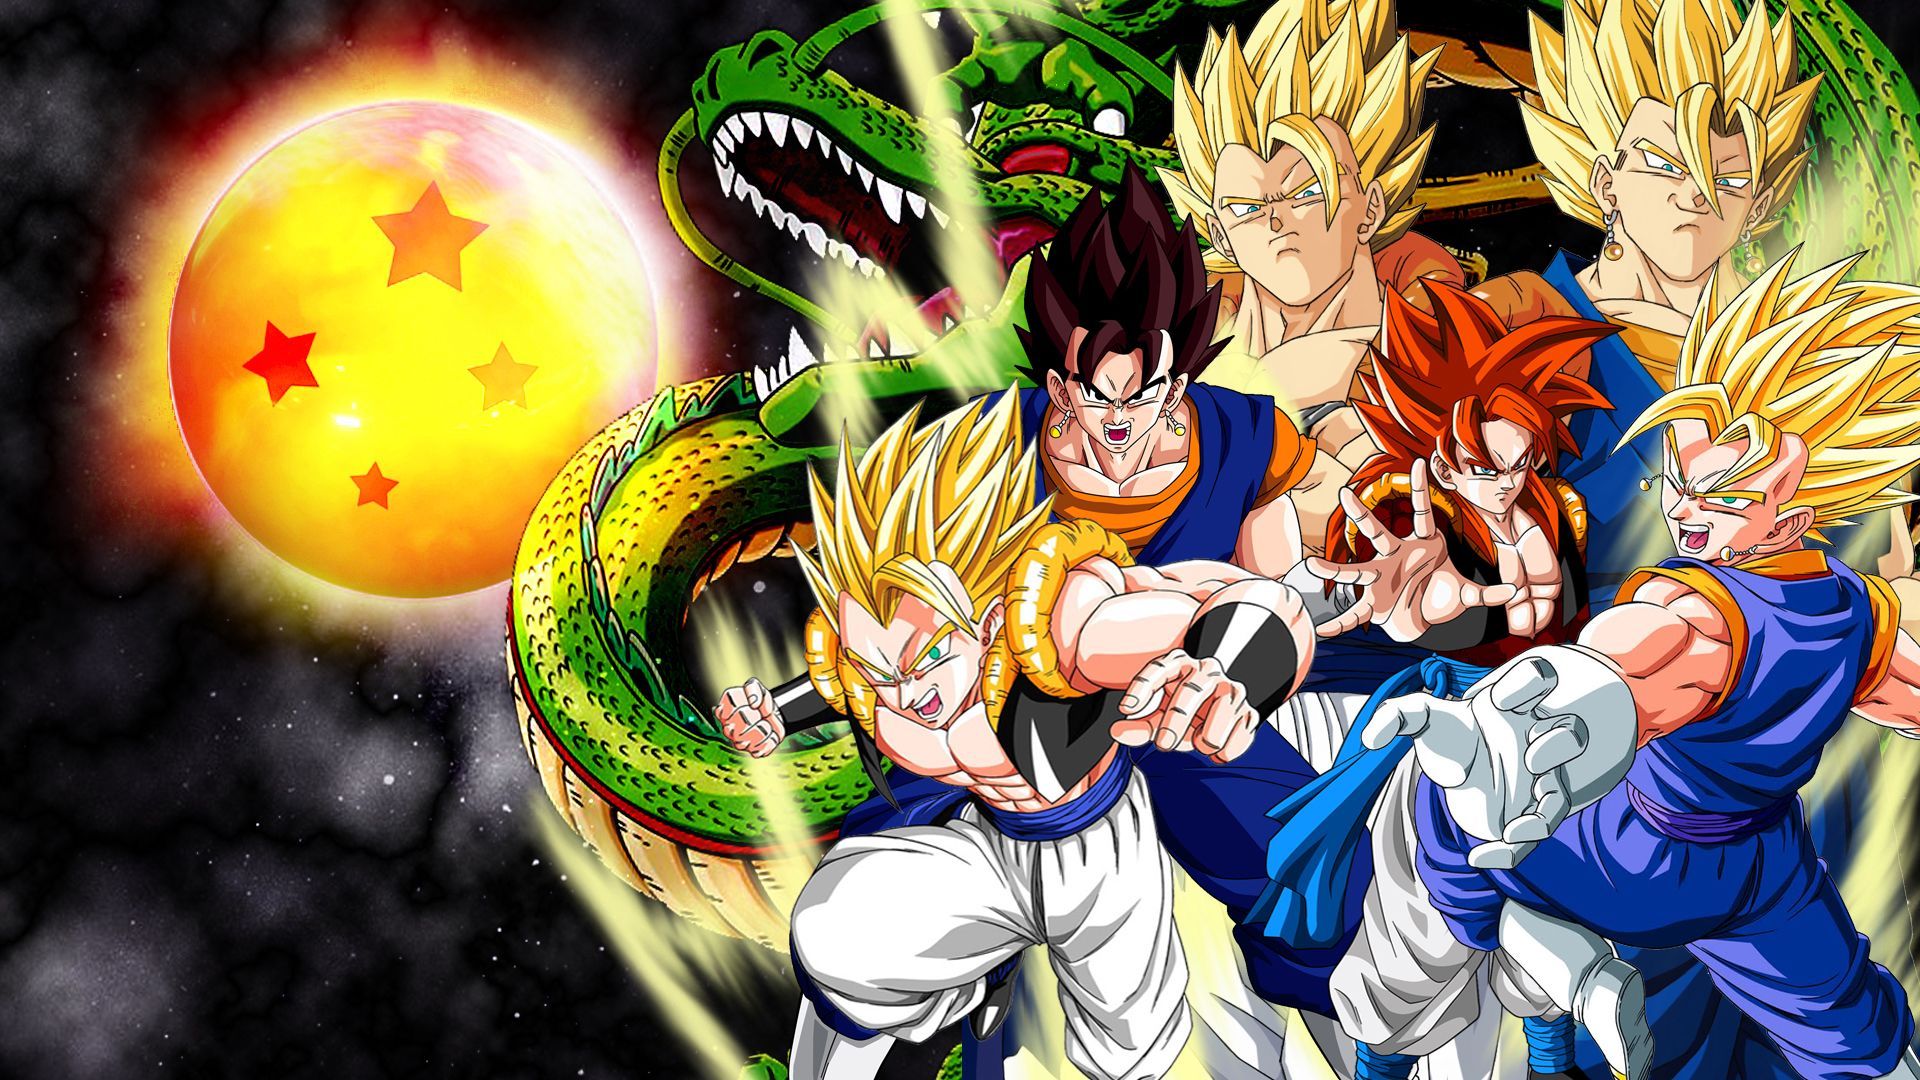 Dragon Ball Z 3D Wallpapers Download - Colaboratory